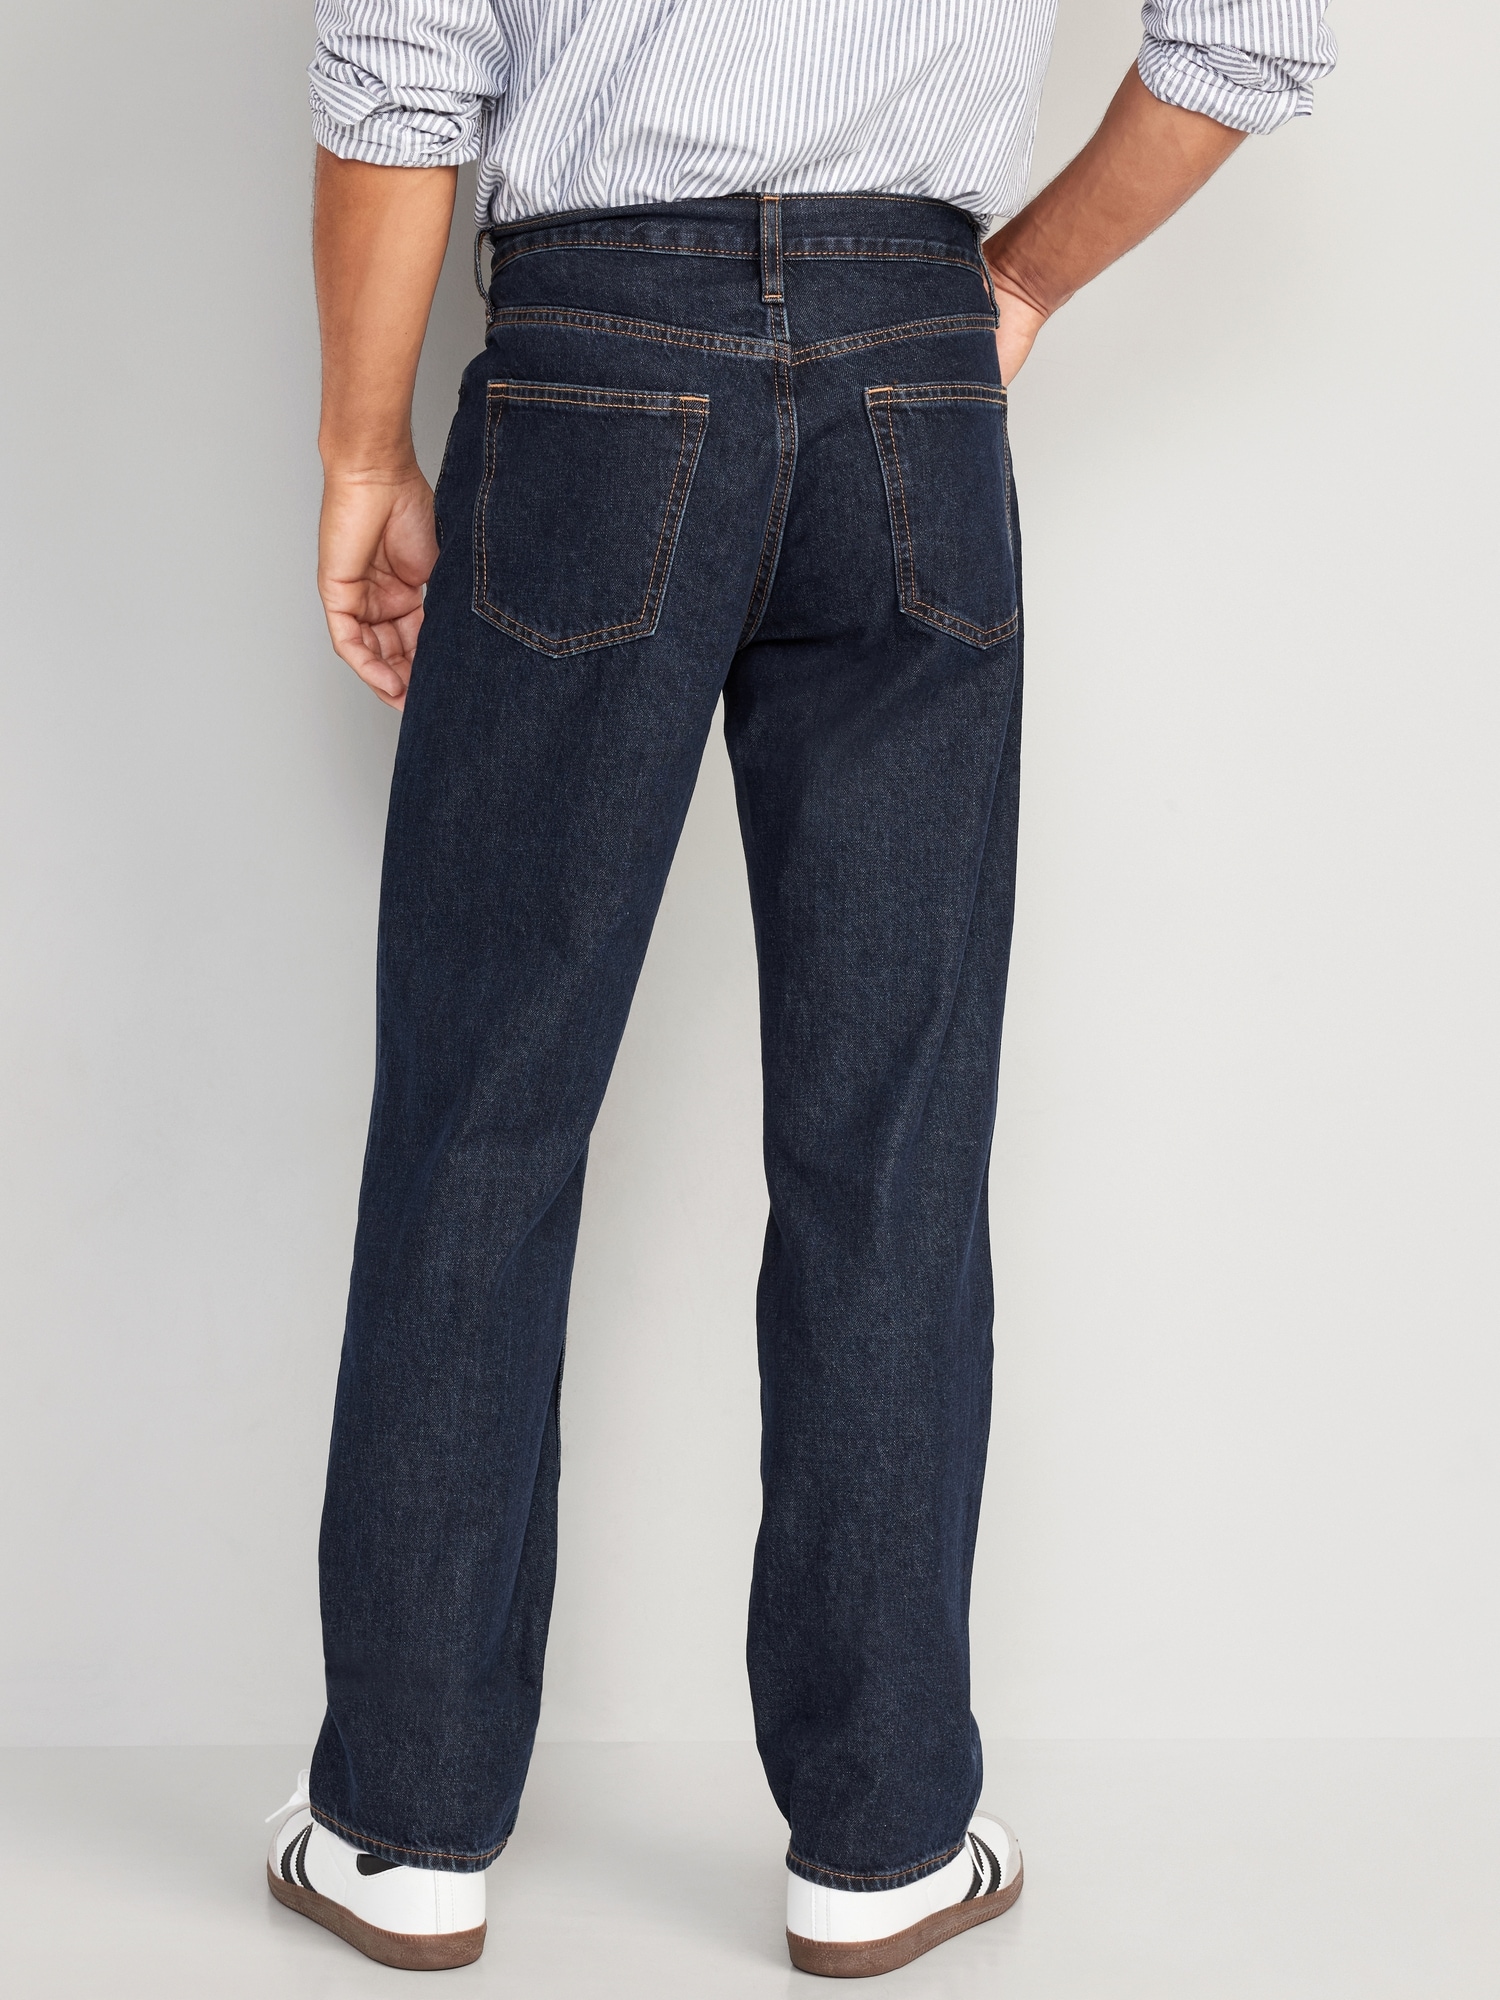 Buy Blue Jeans for Men by ALTHEORY Online | Ajio.com-donghotantheky.vn